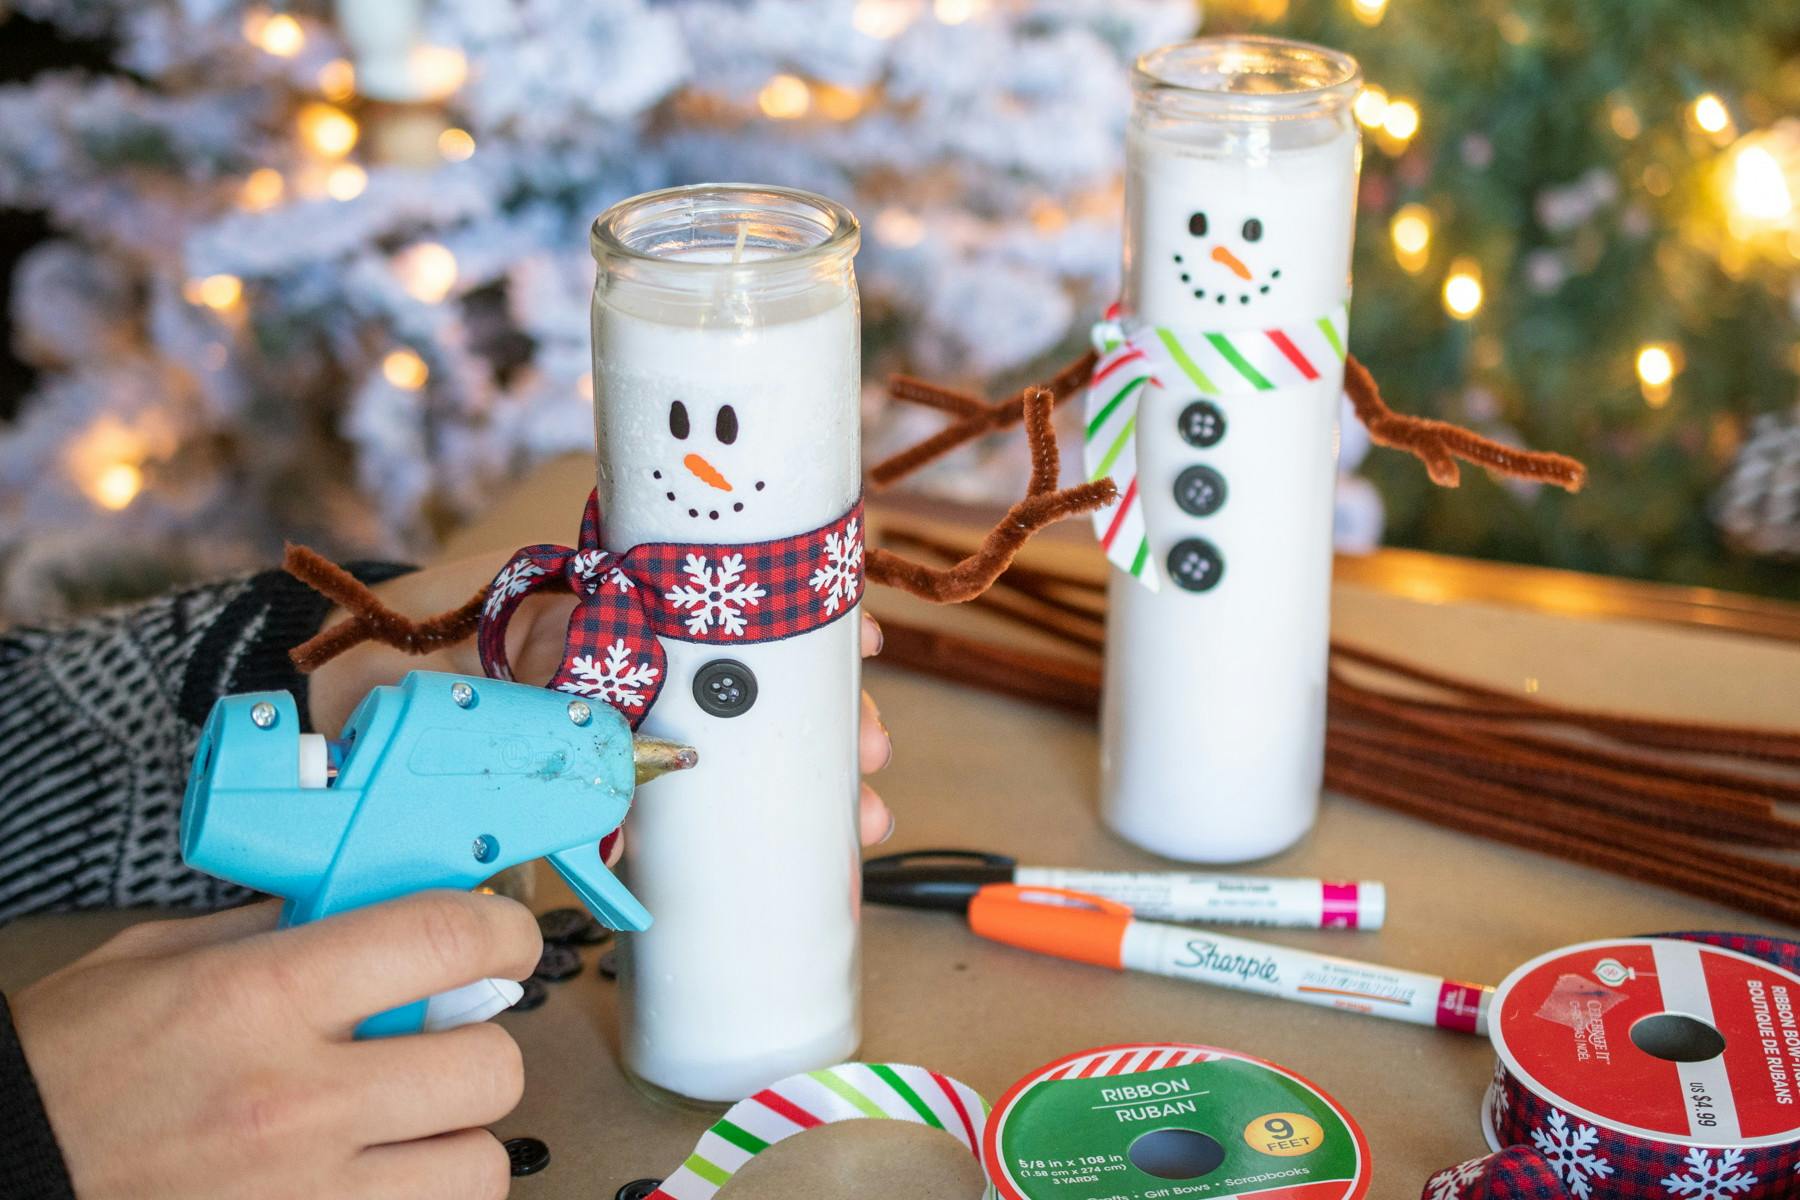 30 Dollar Tree Christmas Crafts & DIY Decoration Ideas - The Krazy Coupon  Lady